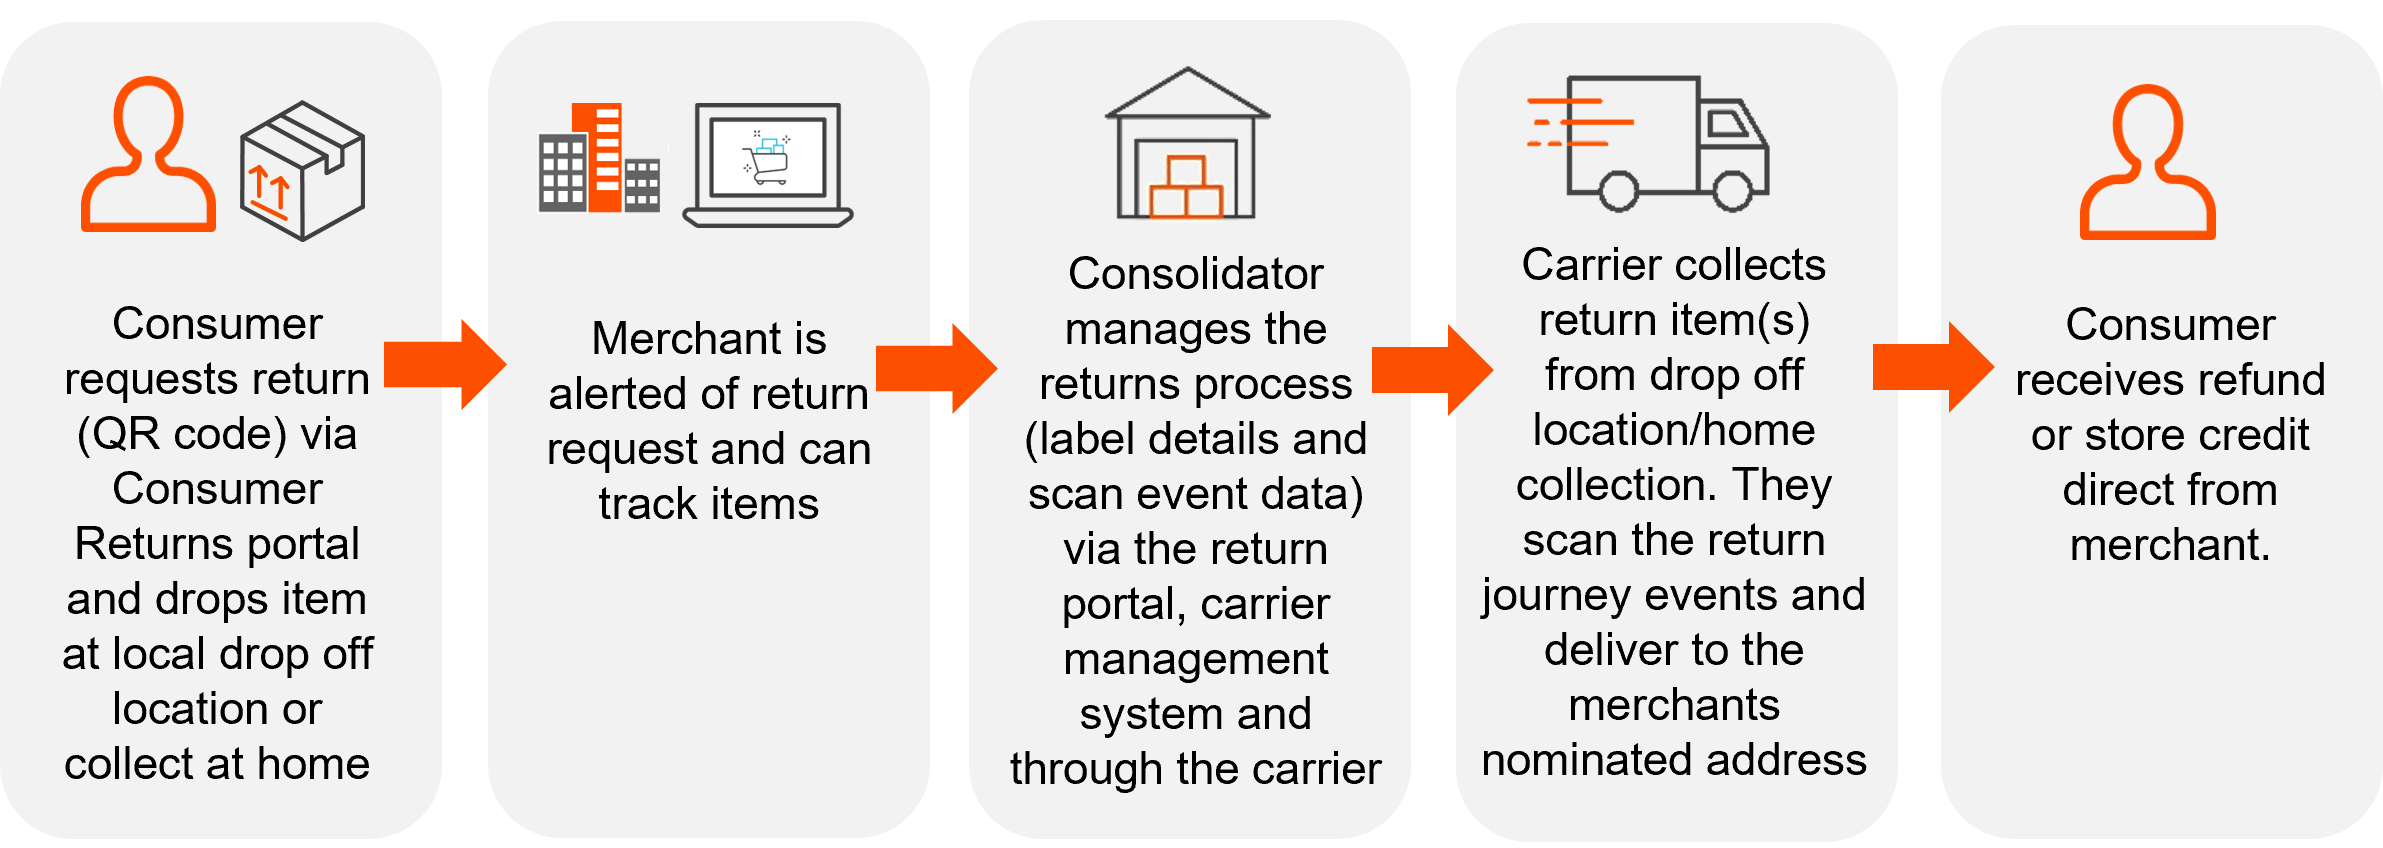 Whistl - eCommerce returns research - consumer returns process